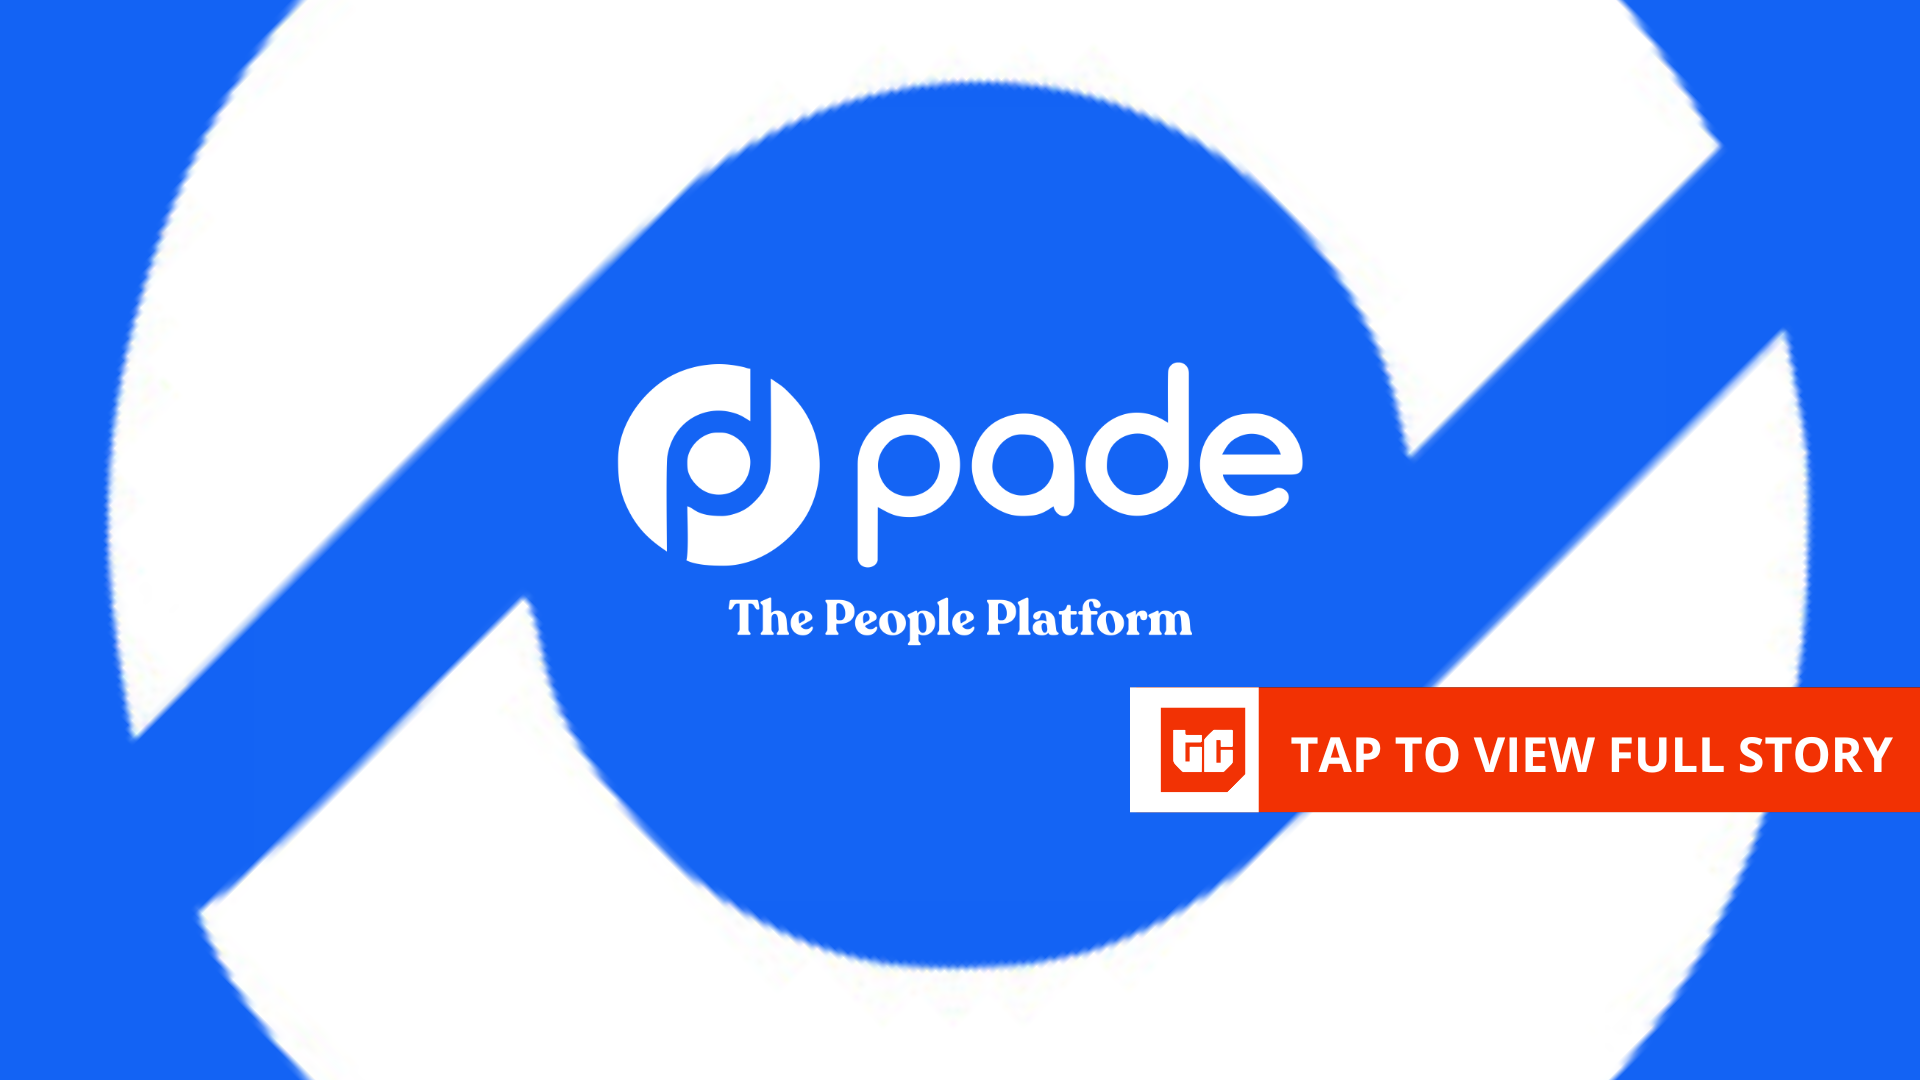 Pade processed ₦11bn in salaries in 2023 after touchdown Flutterwave as consumer